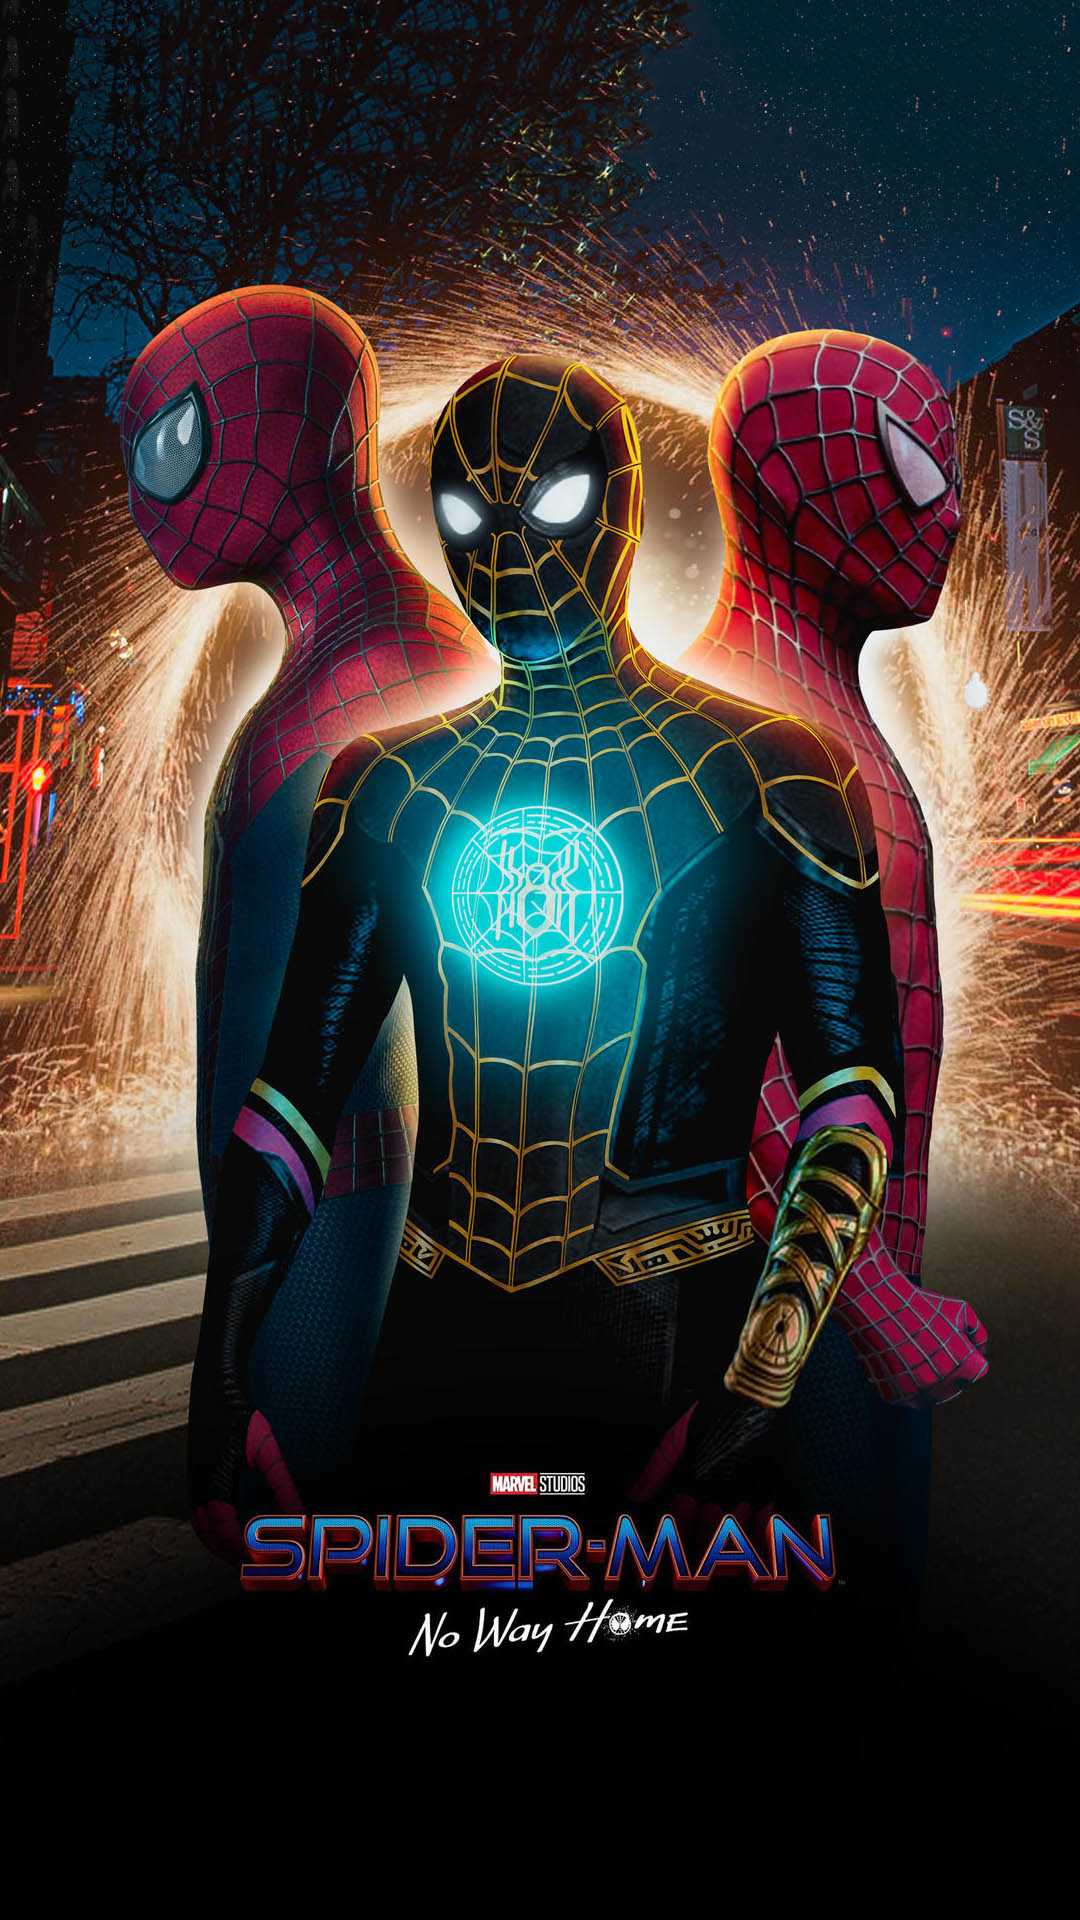  Spiderman no way home wallpaper 4k for mobile